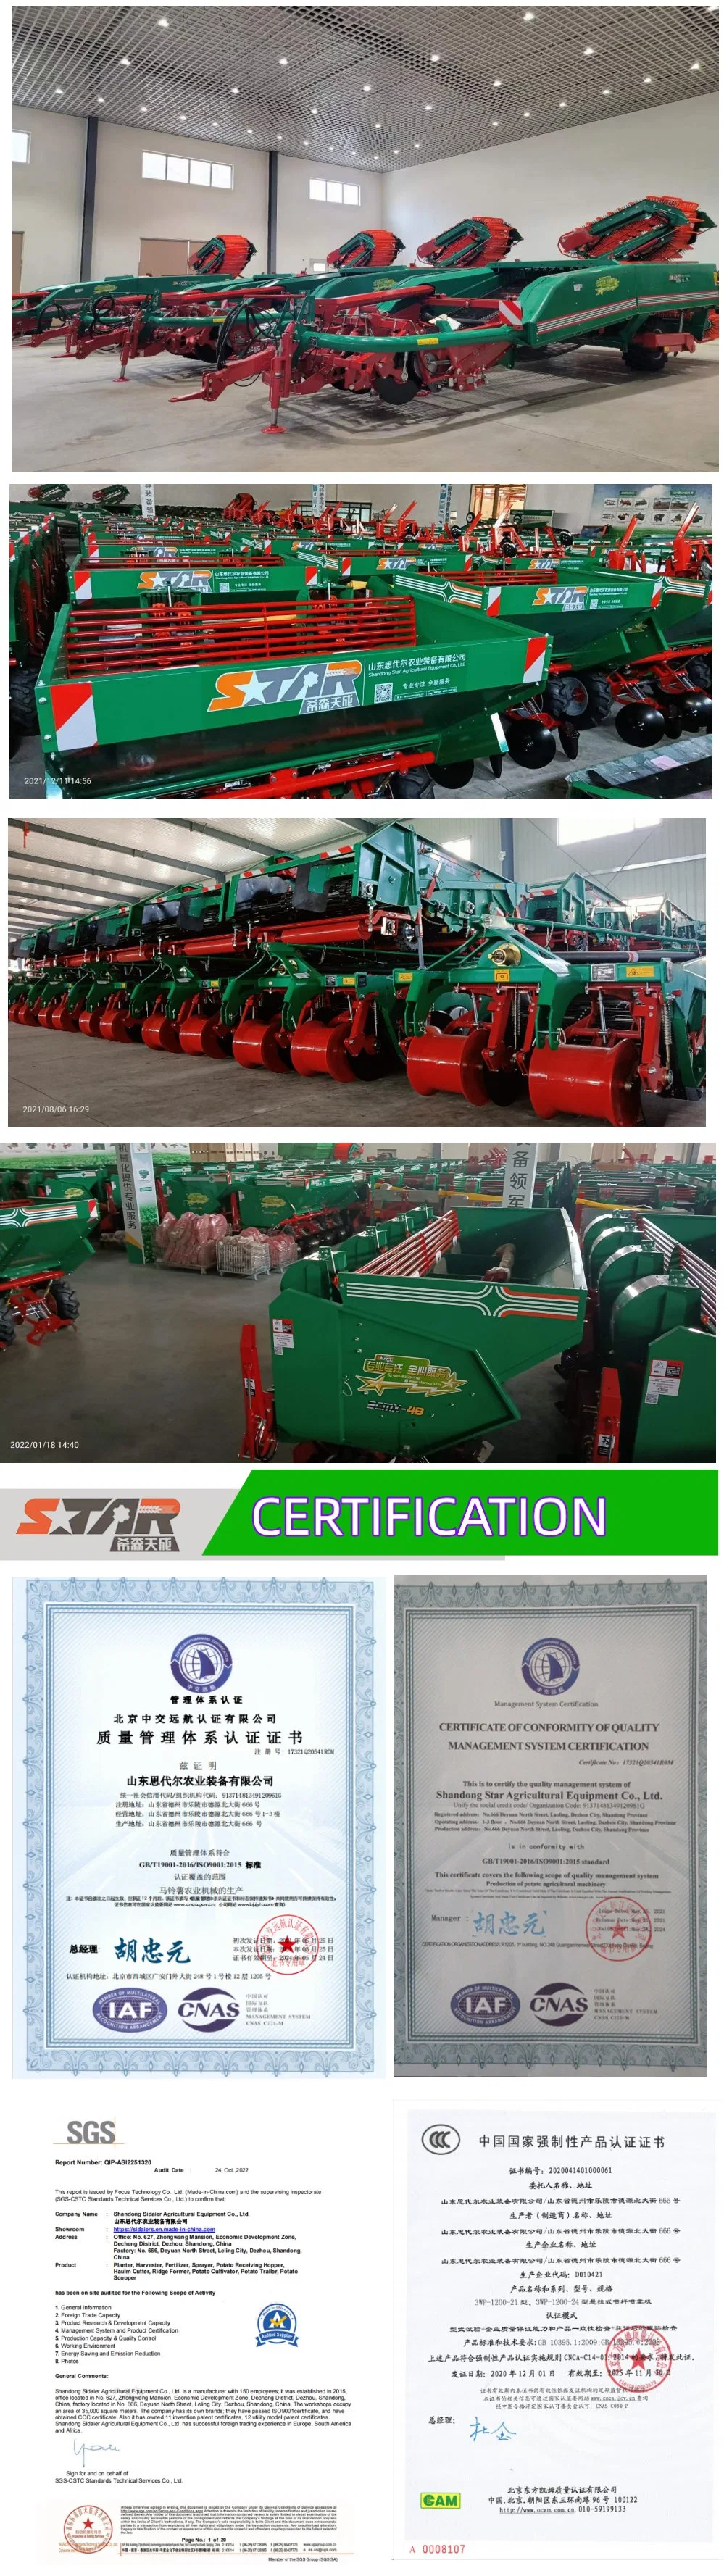 China Professional Factory Agricultural Soil Cultivation Machine Potato Ridge Former